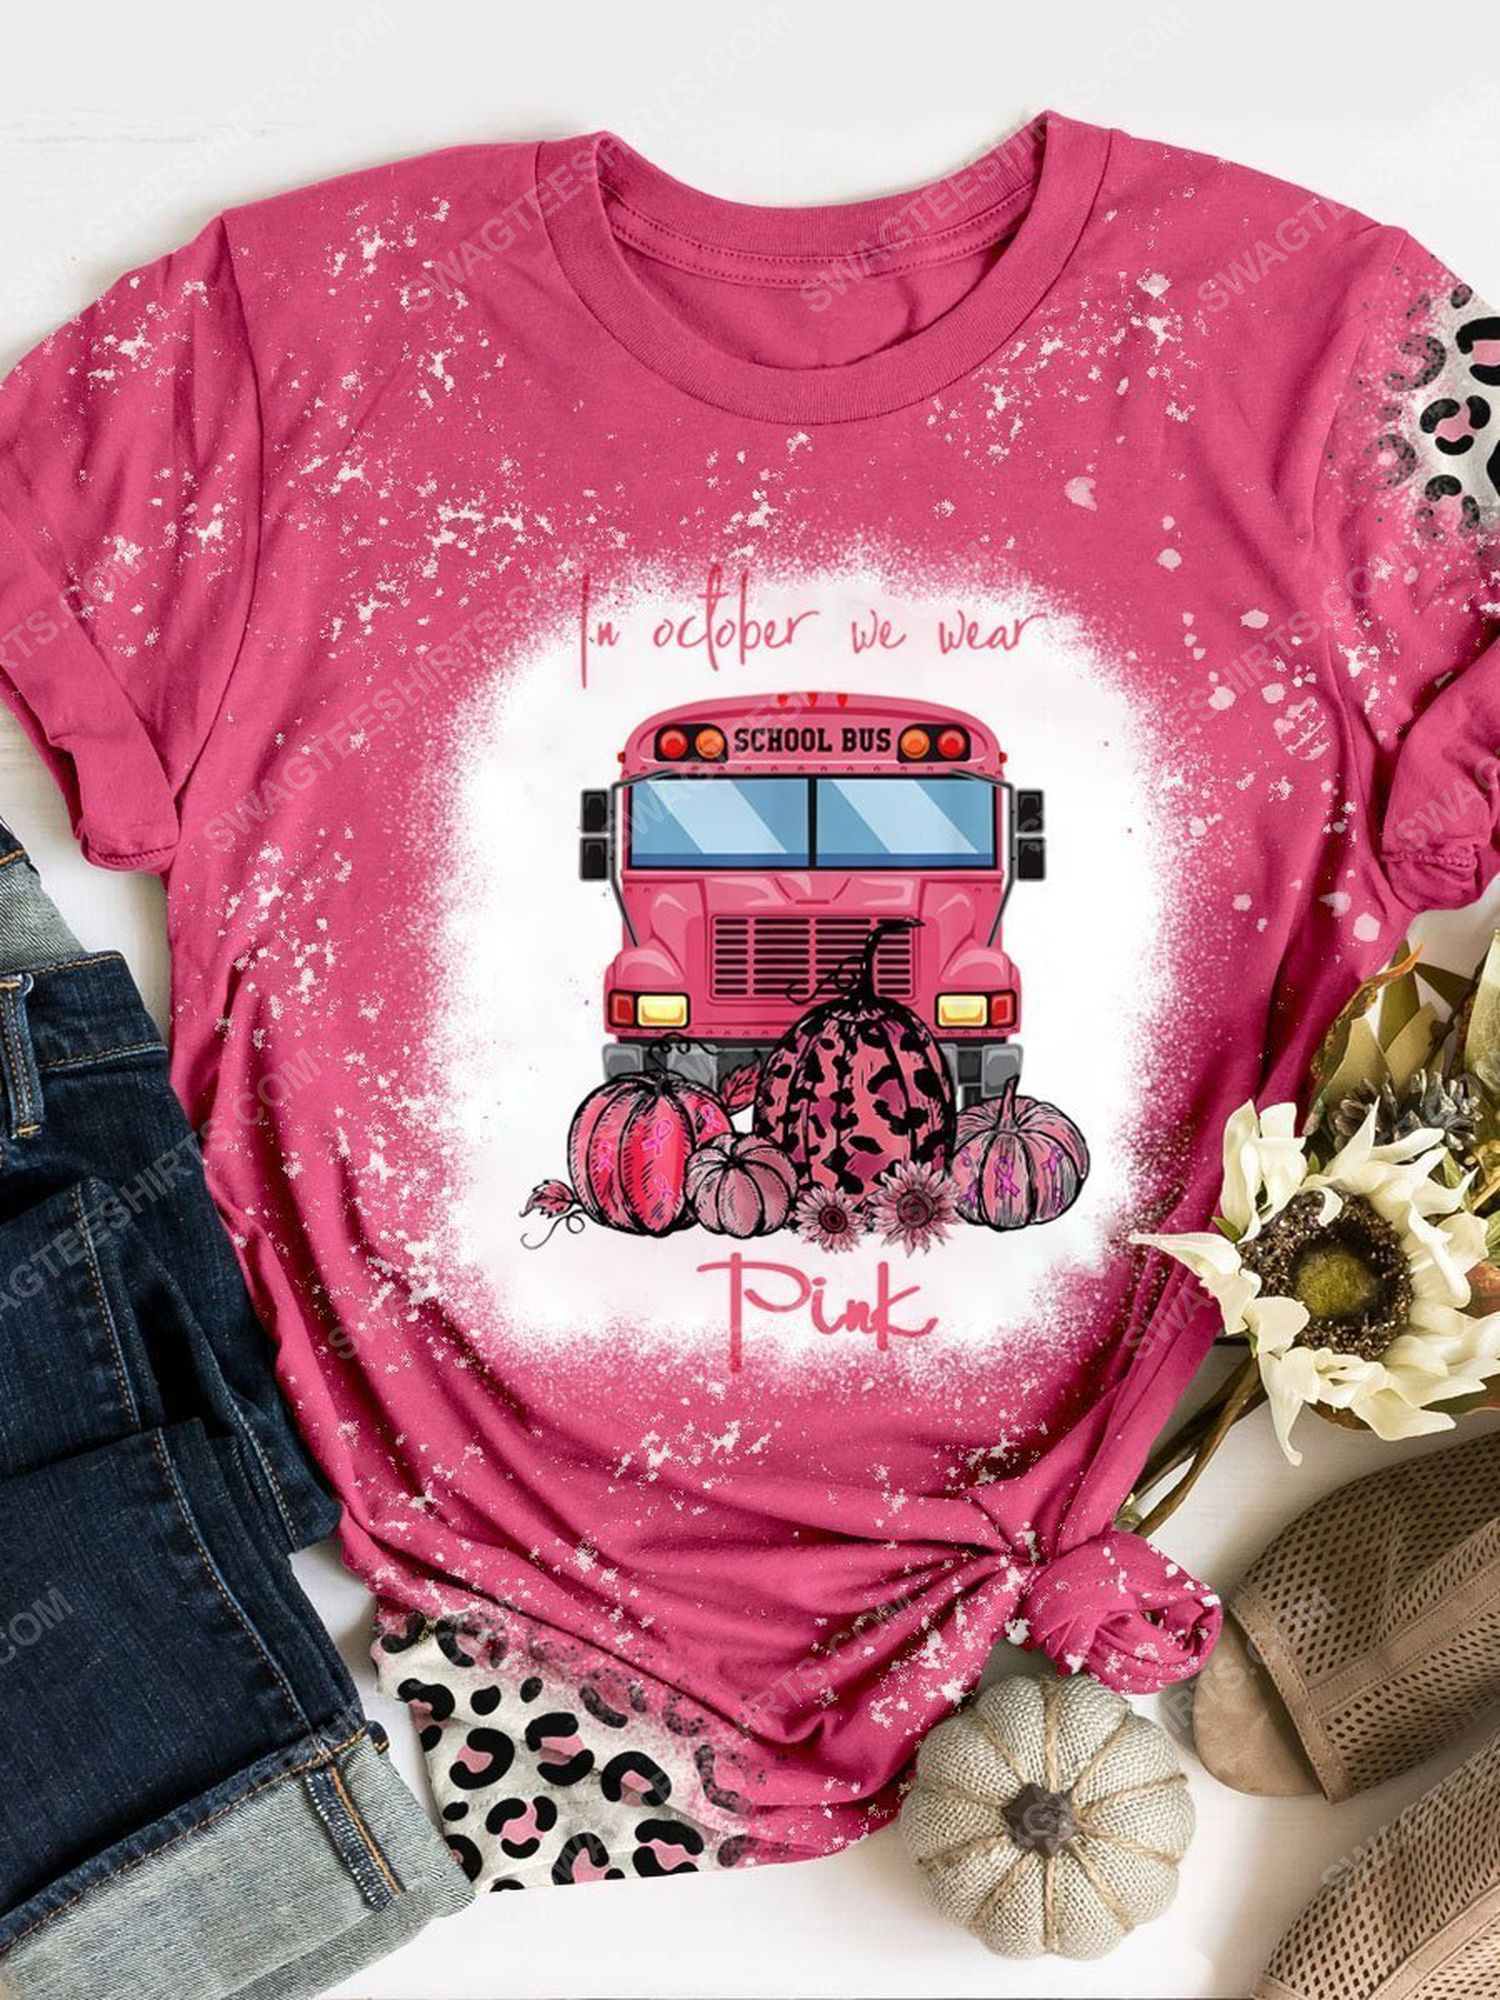 [special edition] Breast cancer awareness in october we wear pink cat and butterfly shirt – maria (cancer)